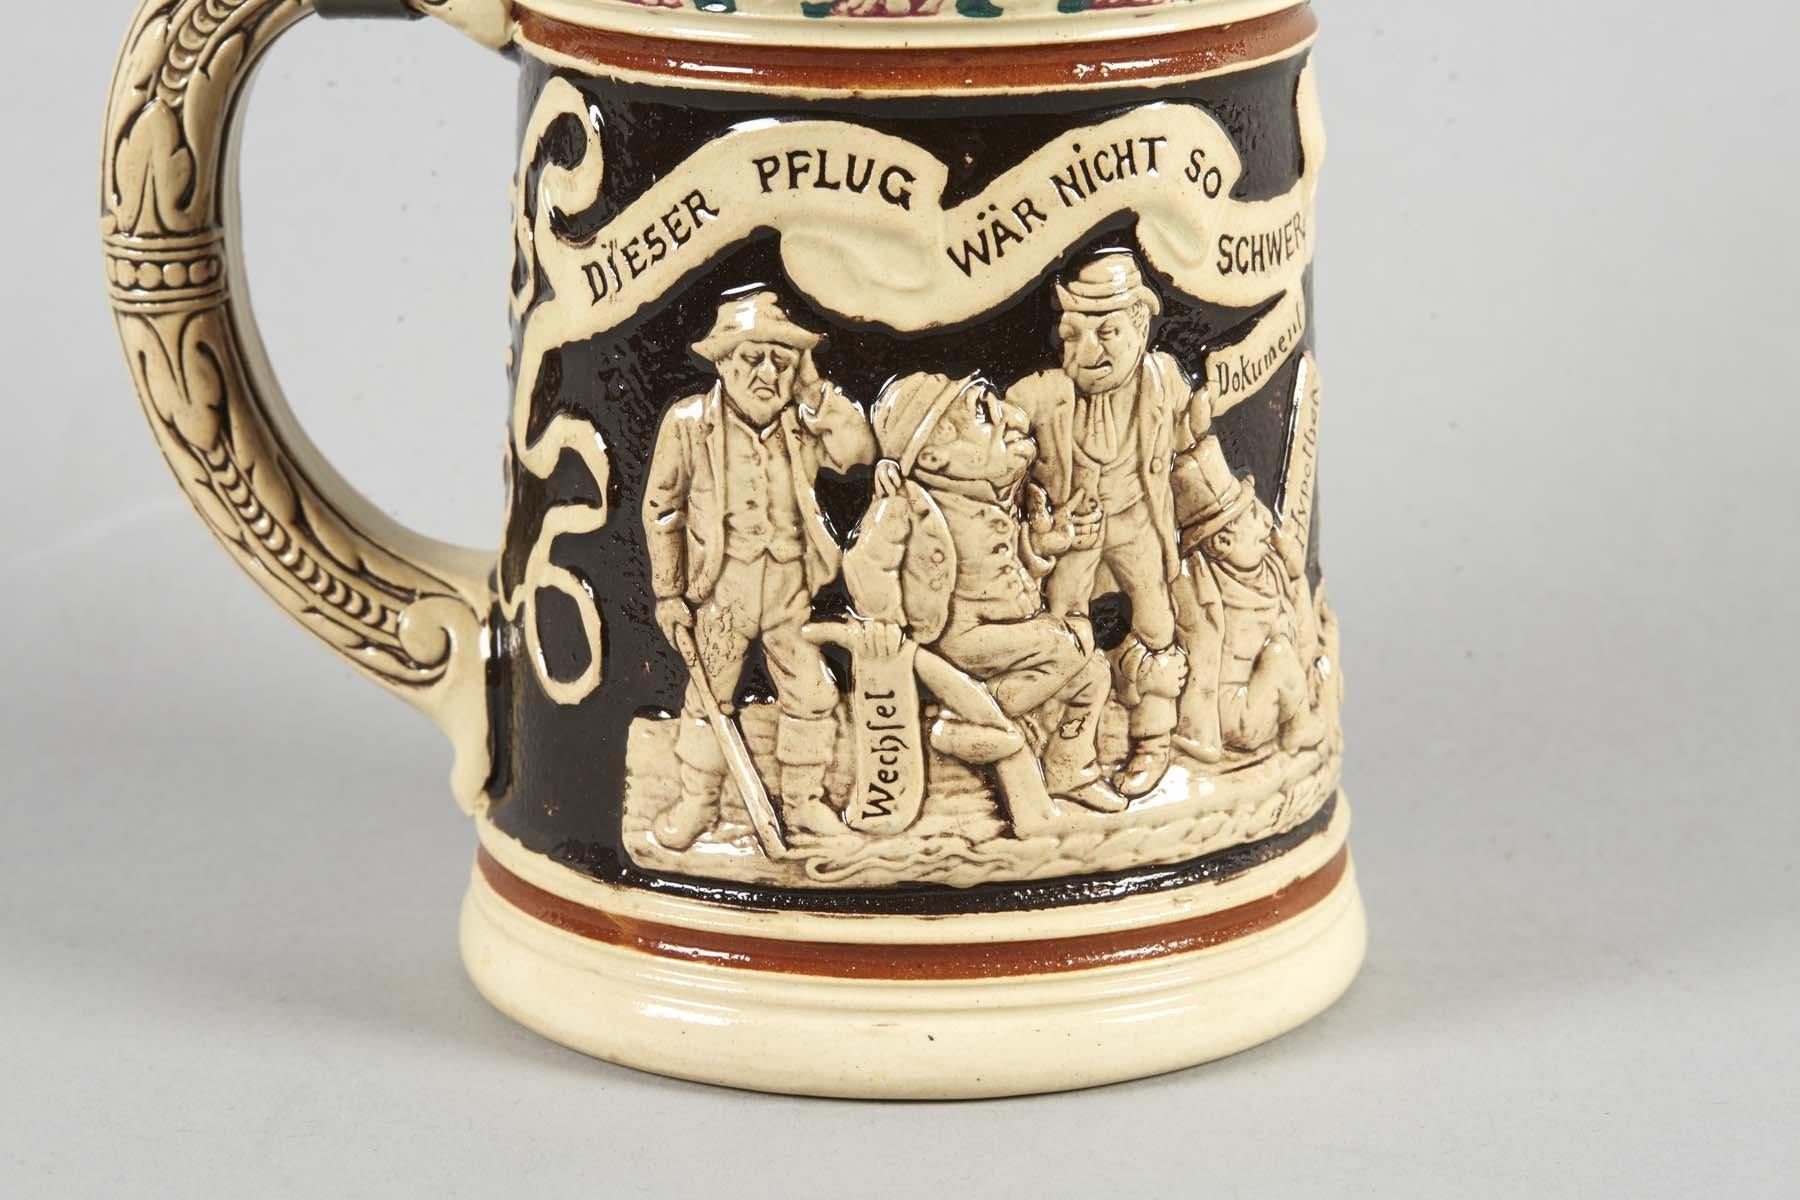 Cream colored ceramic stein with a curved ceramic handle with a molded leaf design and a conical pewter lid with a pewter thumb lift and pewter mountings with embossed floral designs. The body has one panel with a bas-relief design, painted black in